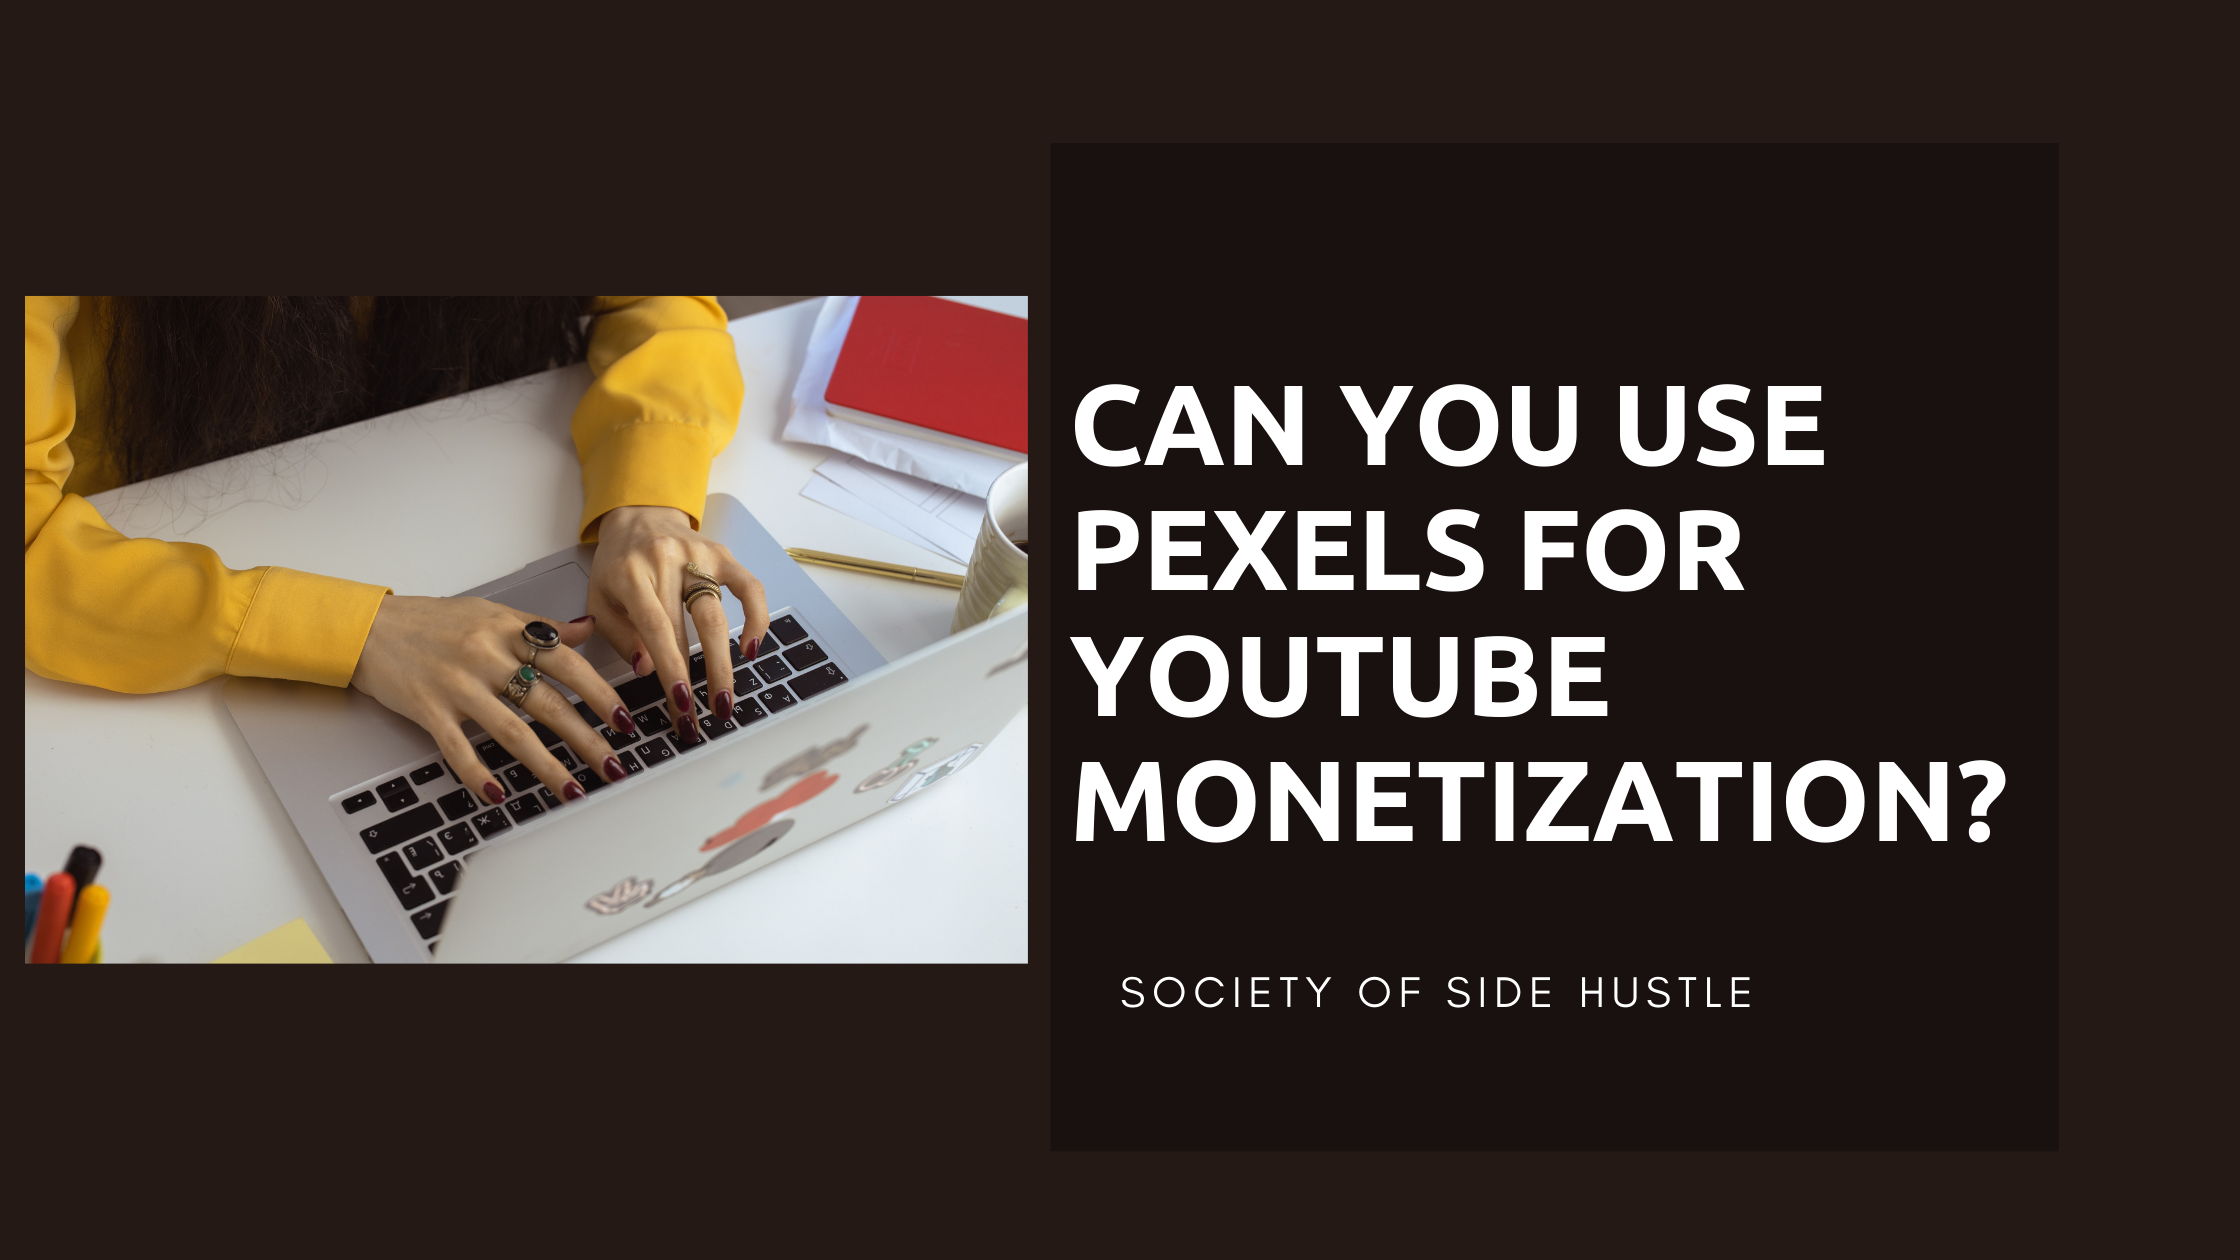 Can I Use Pexels Videos For Youtube Monetization? (Explained)